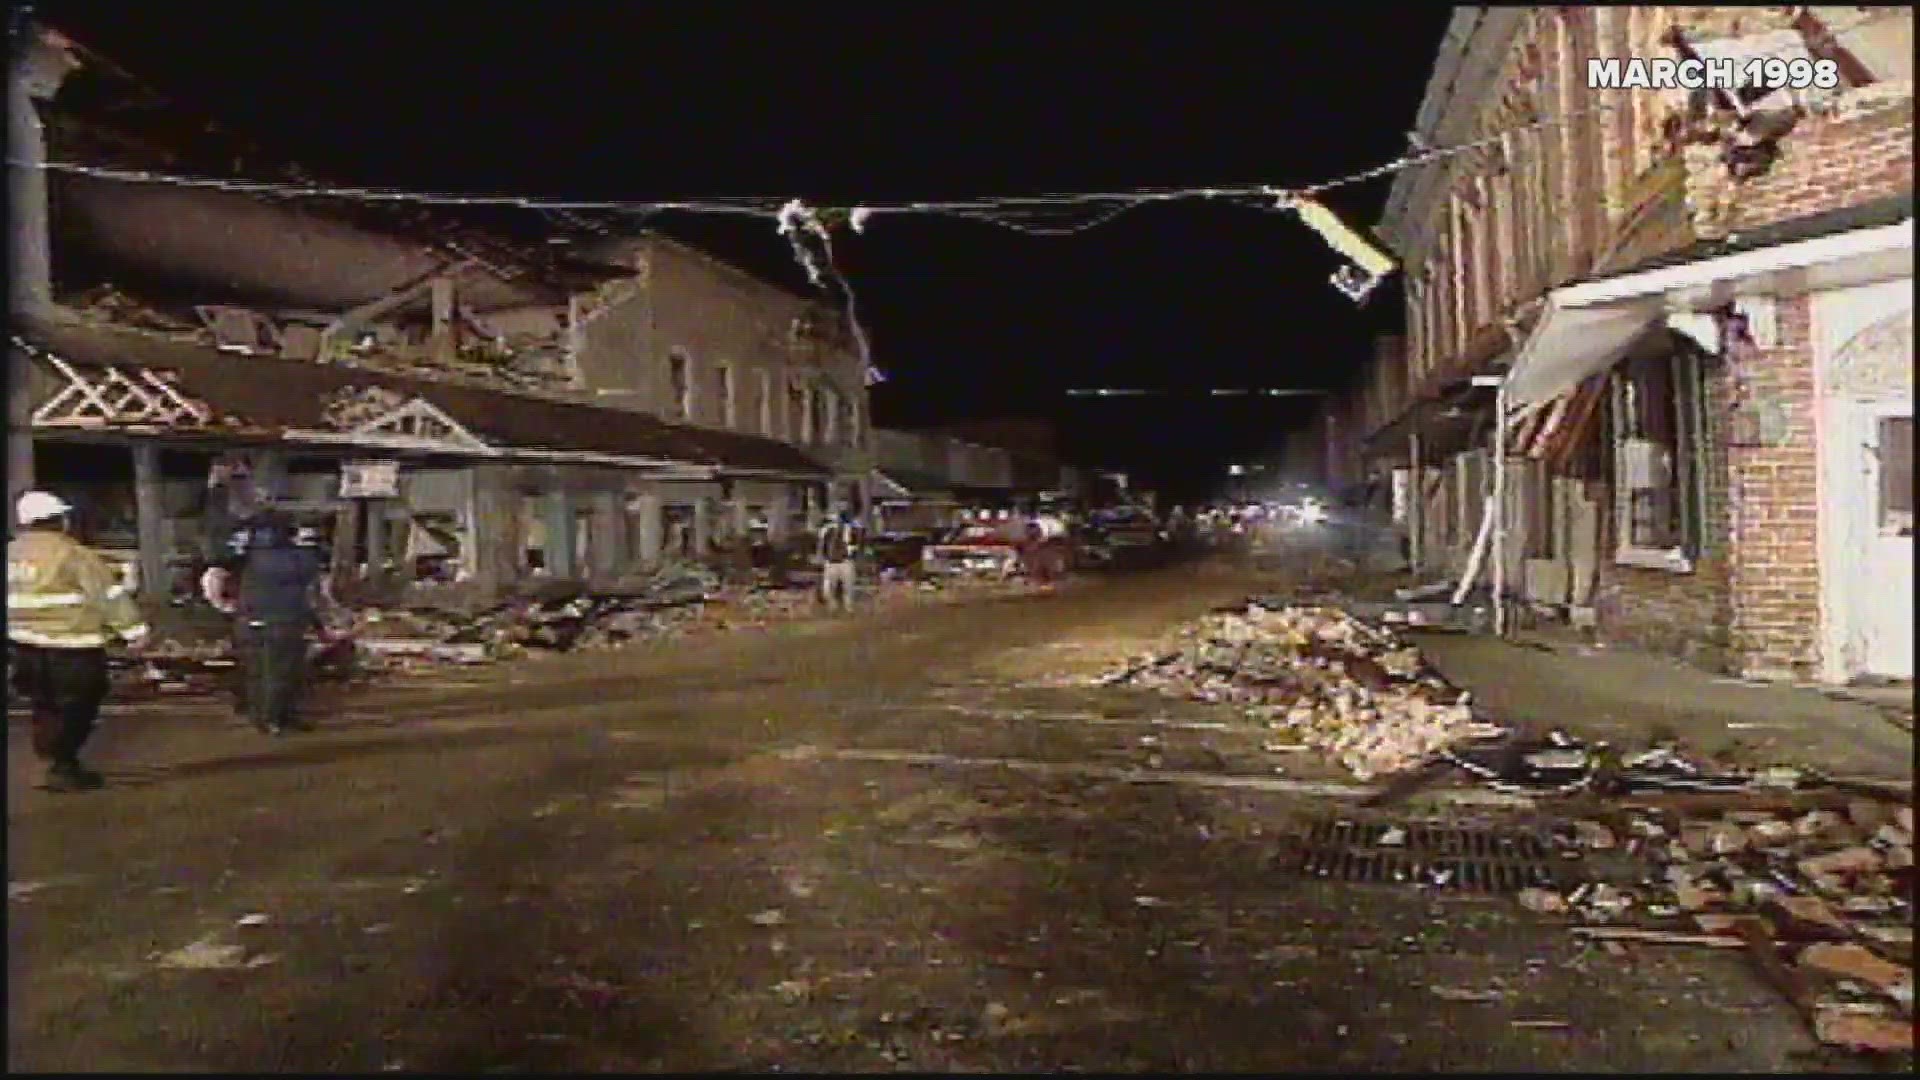 A powerful tornado tore through downtown Stoneville 25 years ago. 2 people died and more than a dozen were injured.